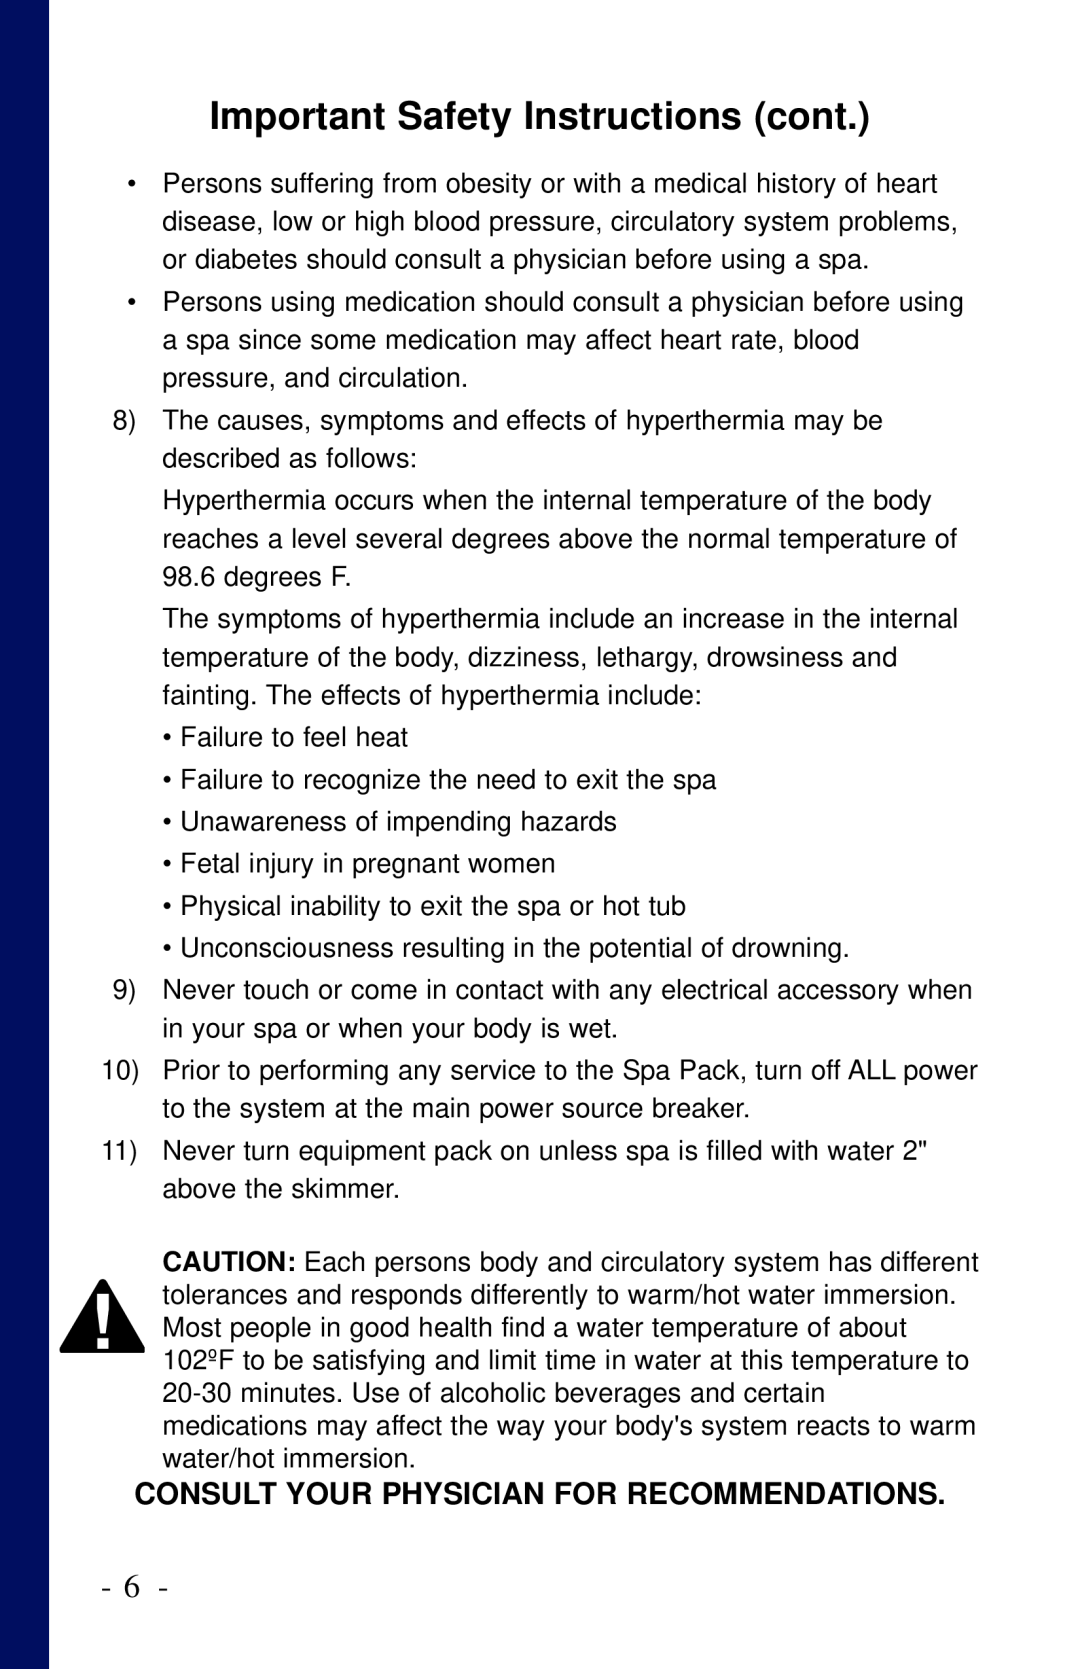 Dynasty Spas 2006 owner manual Important Safety Instructions cont, Consult Your Physician For Recommendations 